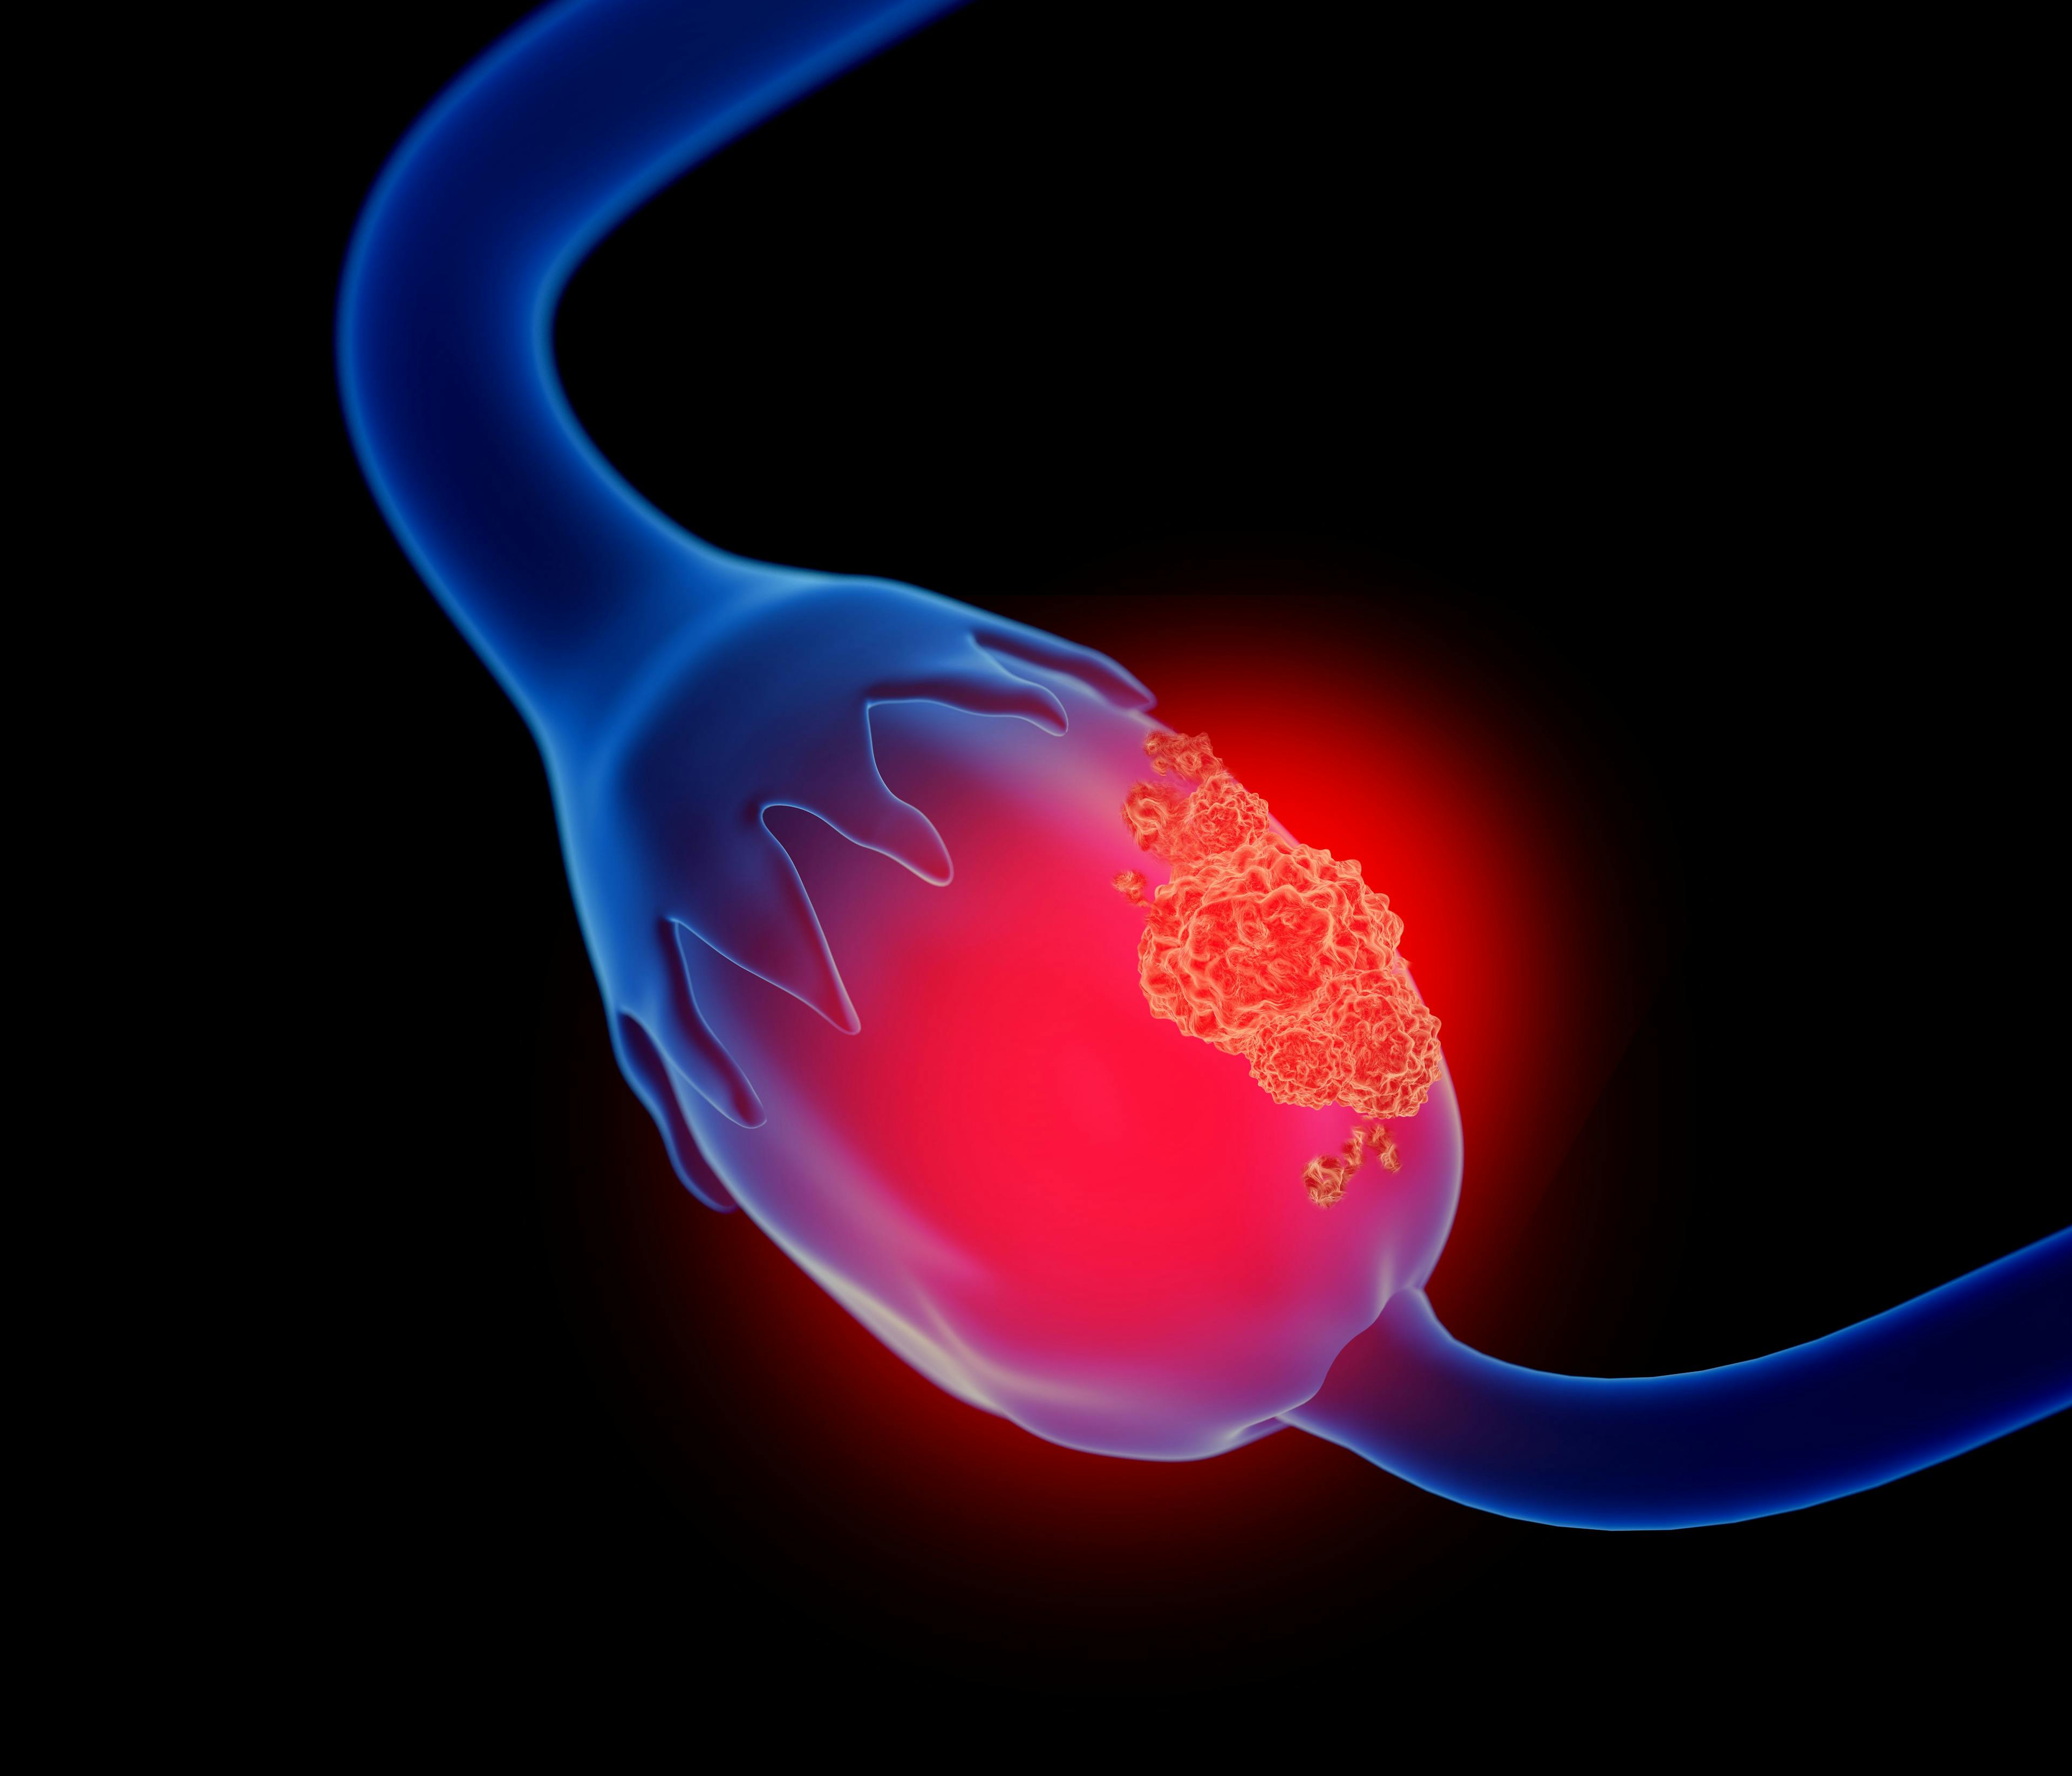 Factors that may predict endometriosis progression to ovarian cancer